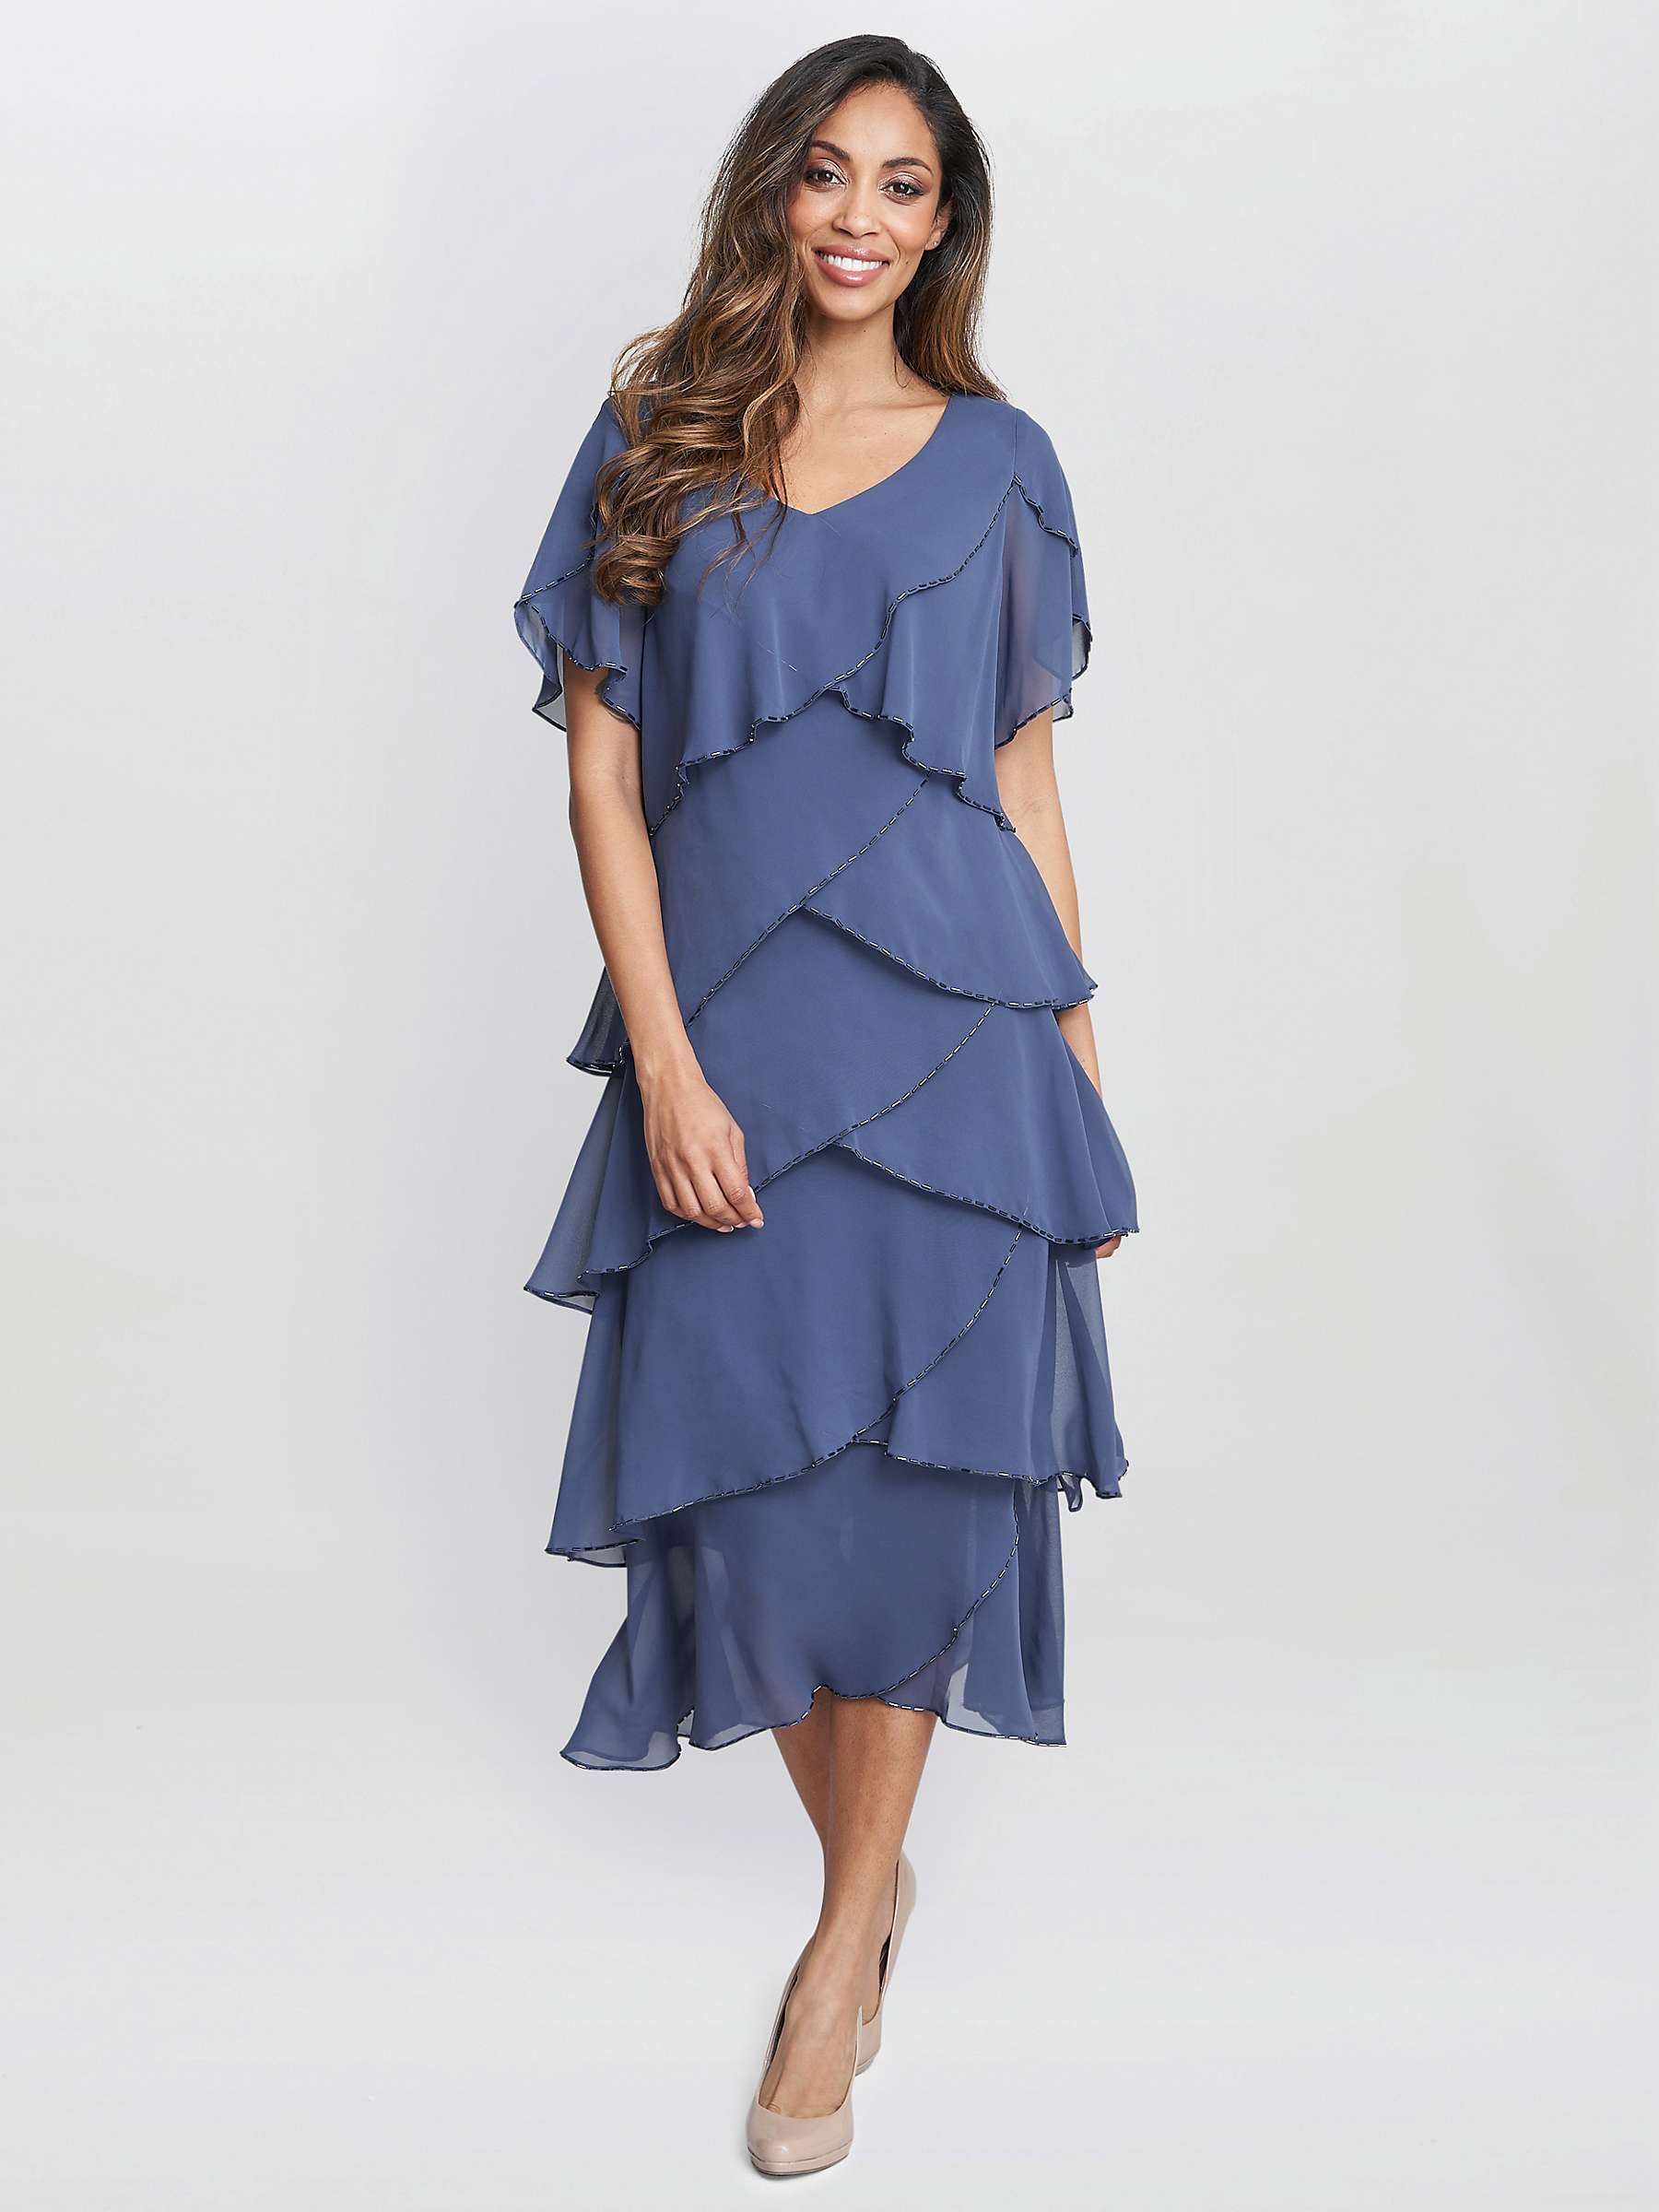 Buy Gina Bacconi Fleur V Neck With Bugle Beads Tier Midi Dress, Wedgewood Online at johnlewis.com